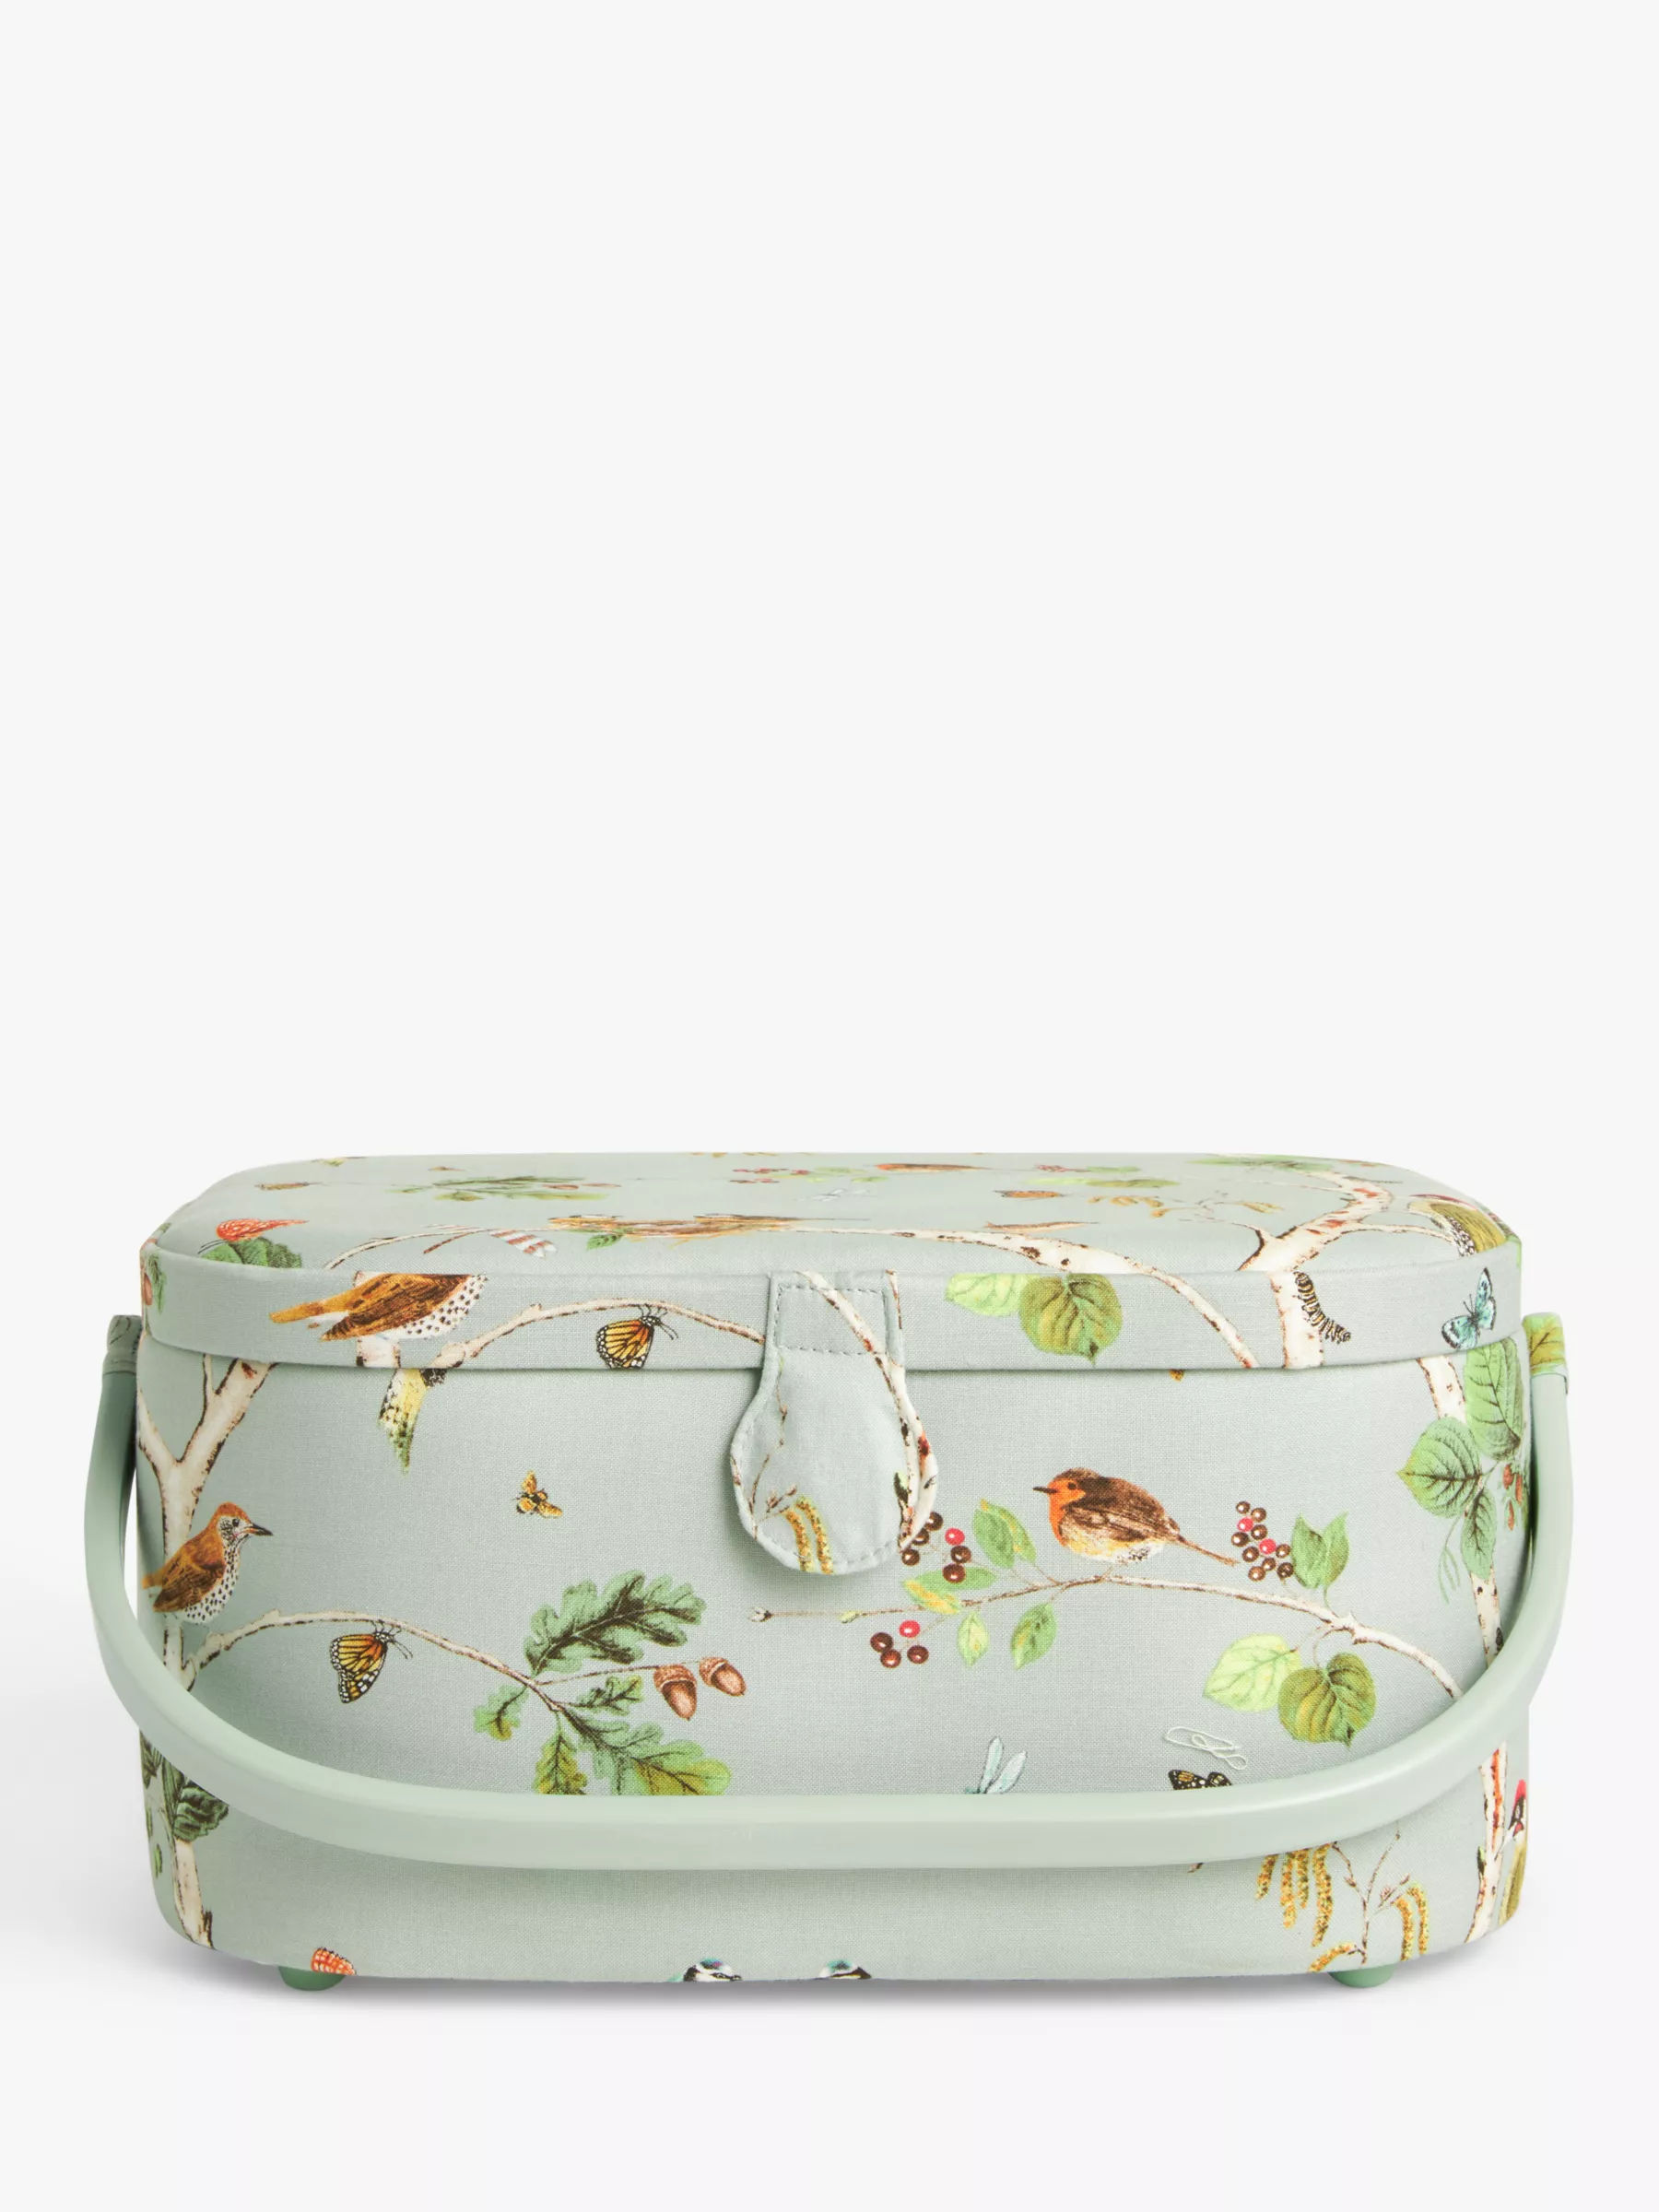 Shop Cath Kidston Kitchen Storage and Organization up to 30% Off |  DealDoodle